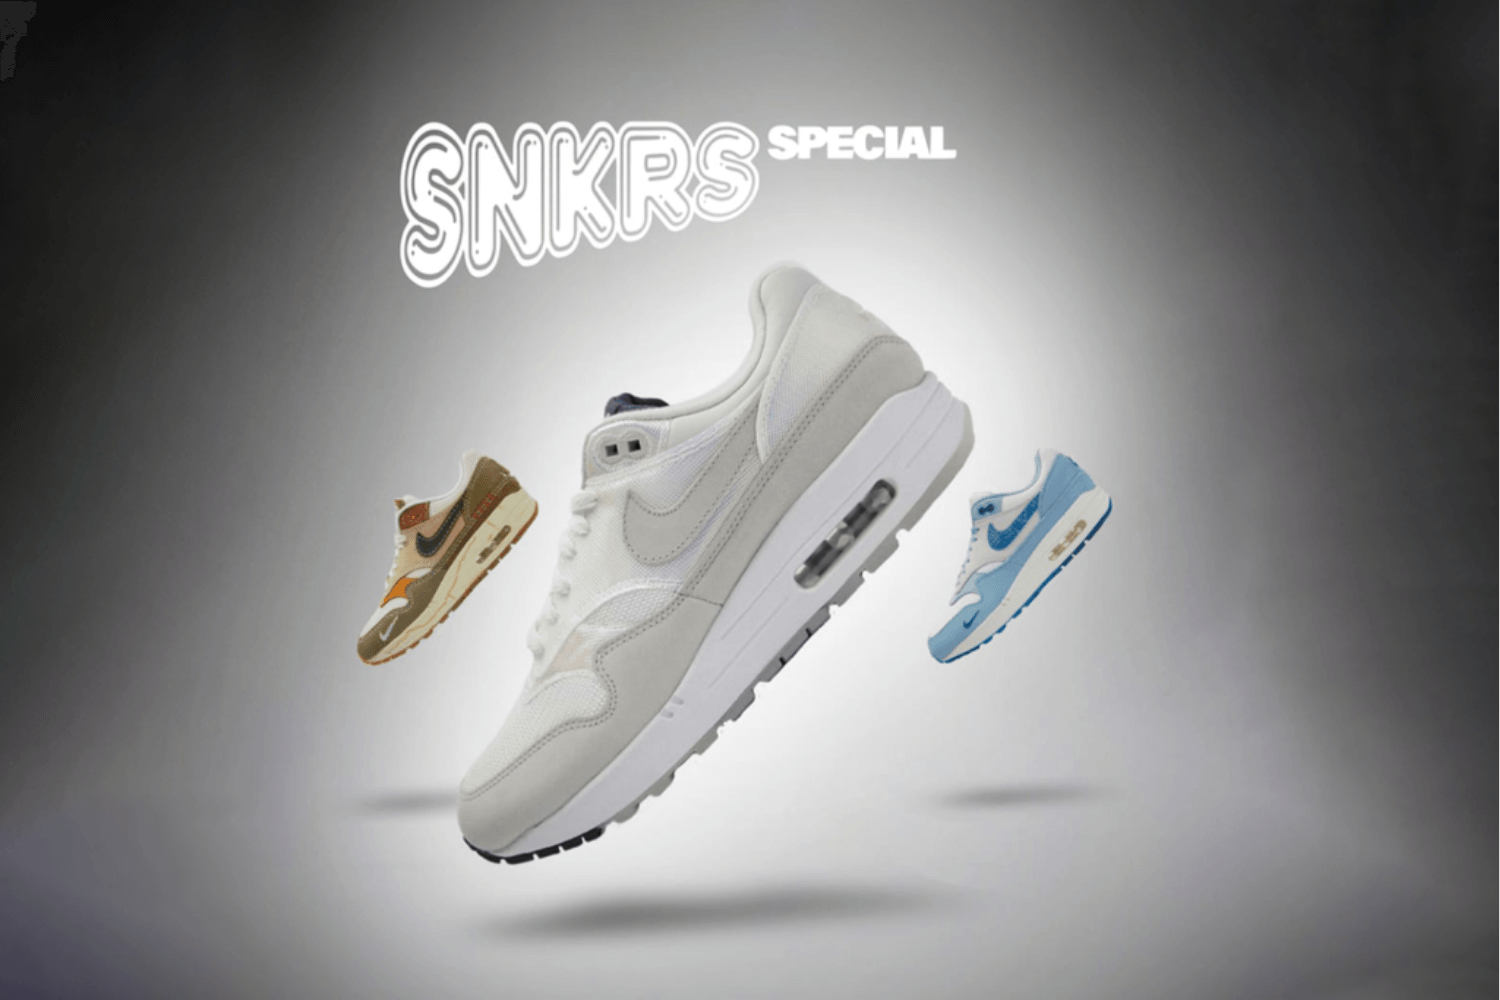 De Nike Air Max 1 line-up voor Air Max Day 2022